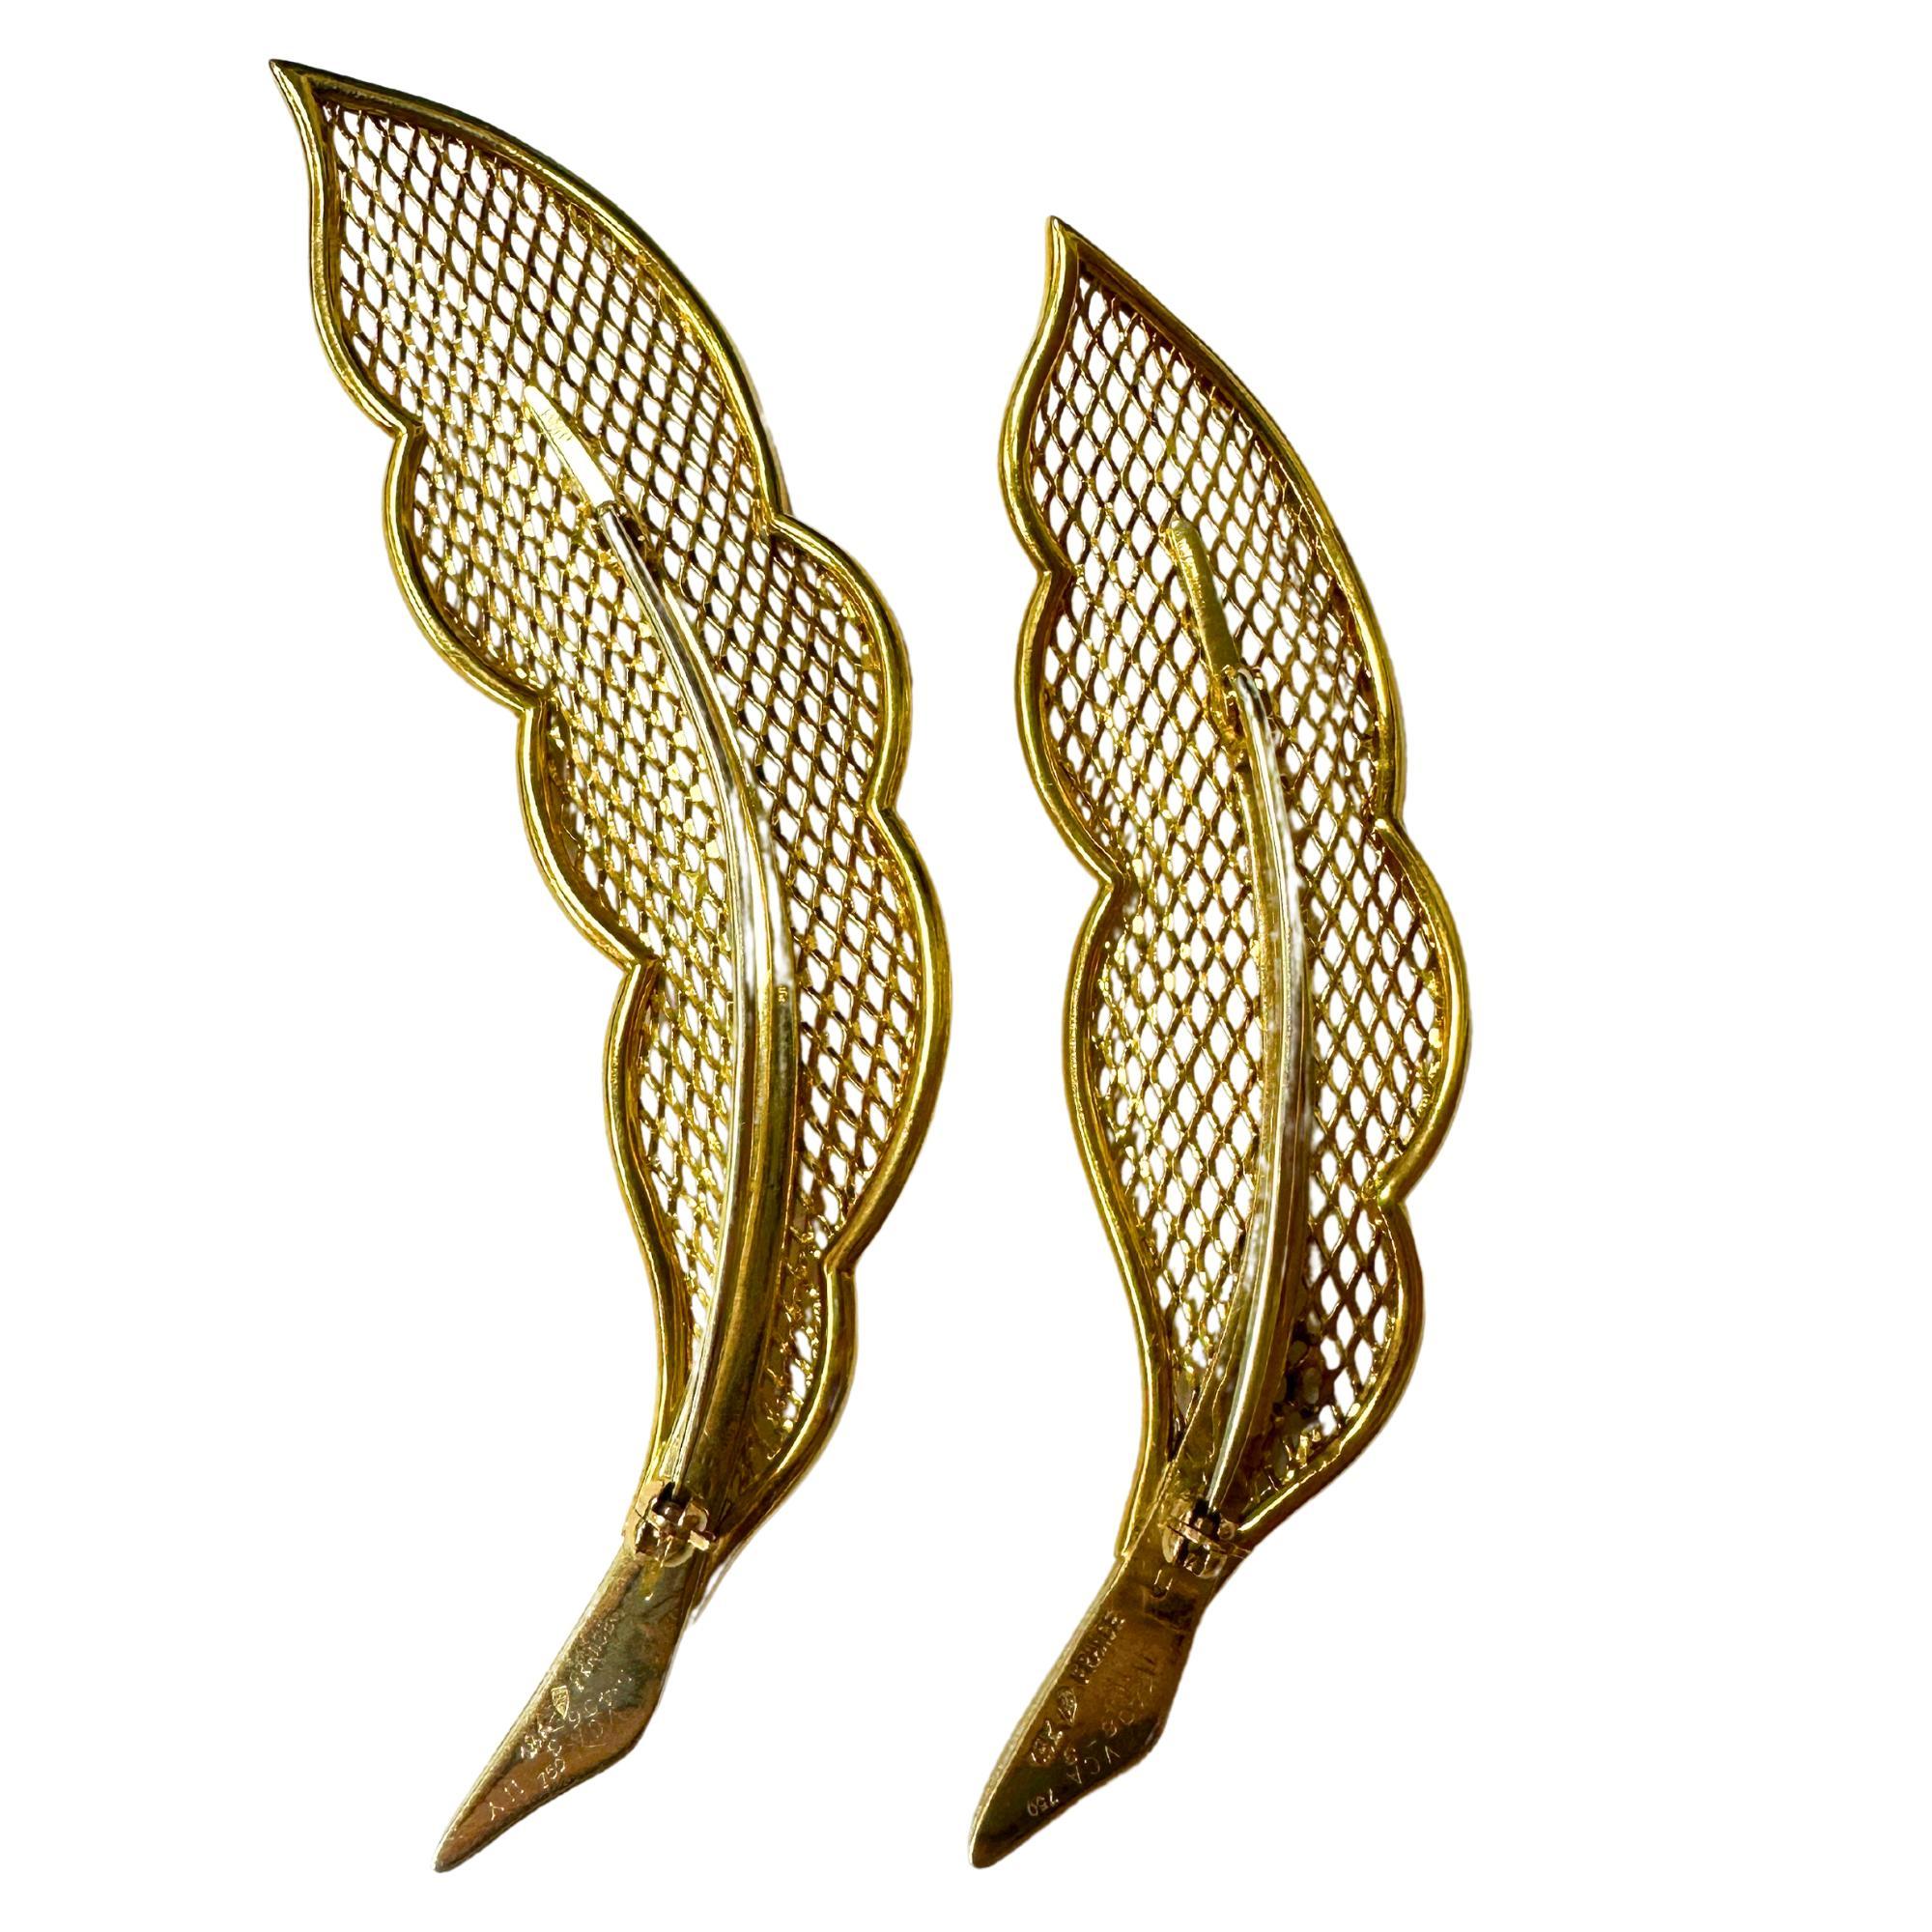 Experience the luxury and elegance of this Pair of 18k Van Cleef and Arpels Feather Brooches. Crafted from 18k yellow gold with intricate markings of 